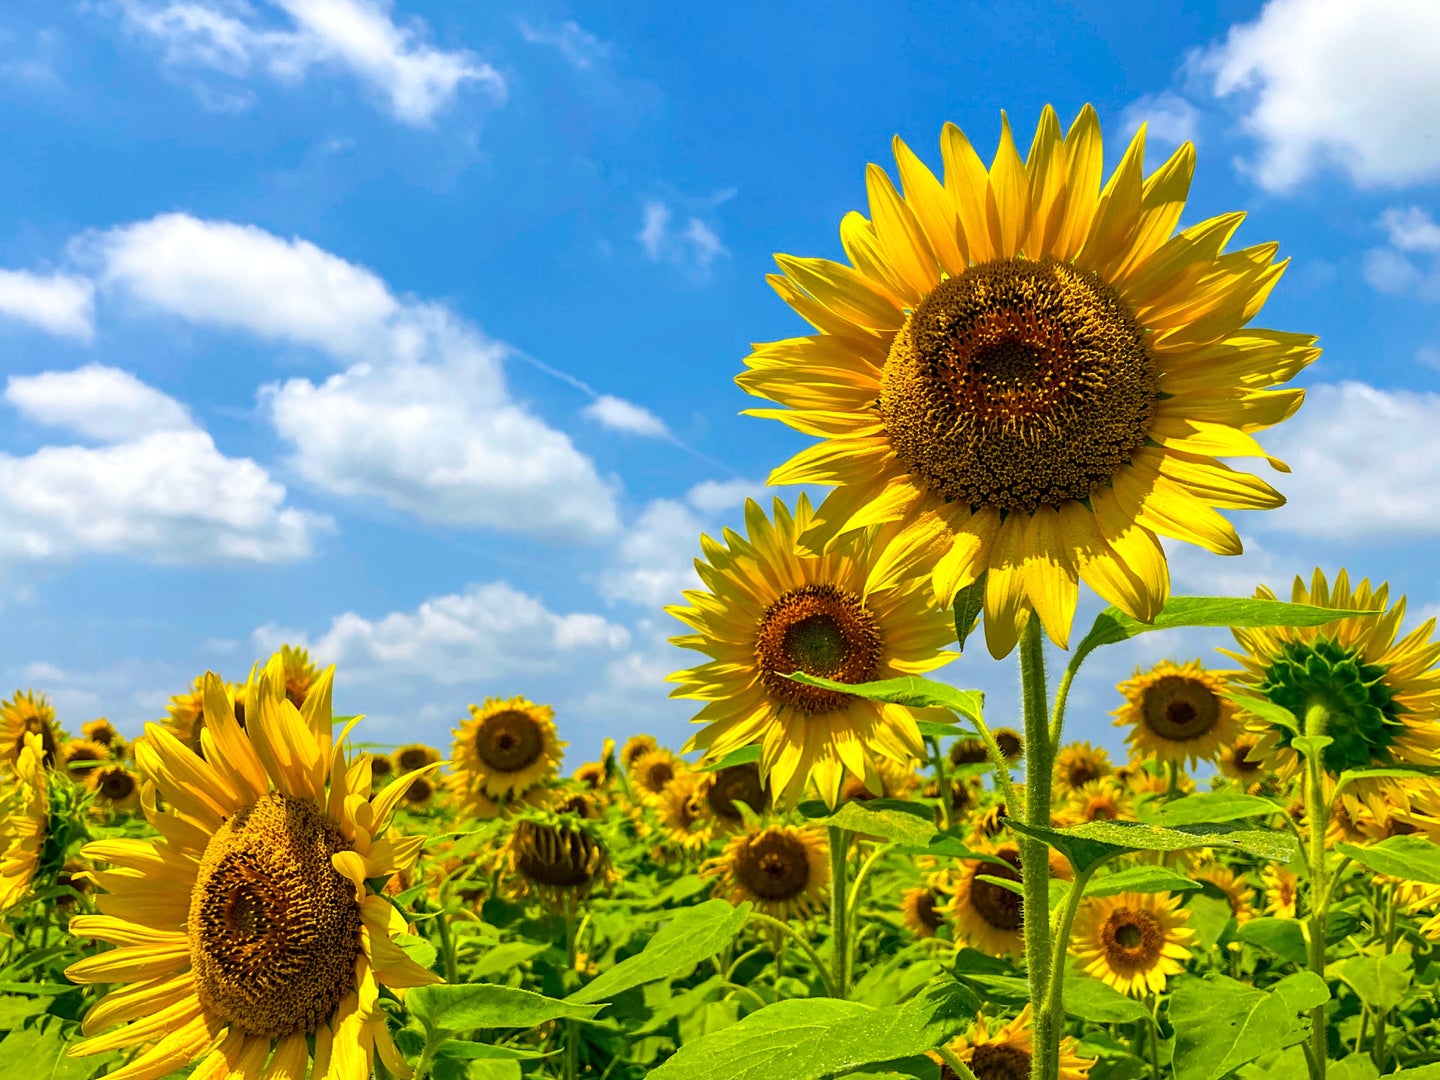 A field of yellow sunflowers under a bright blue sky with some white clouds.